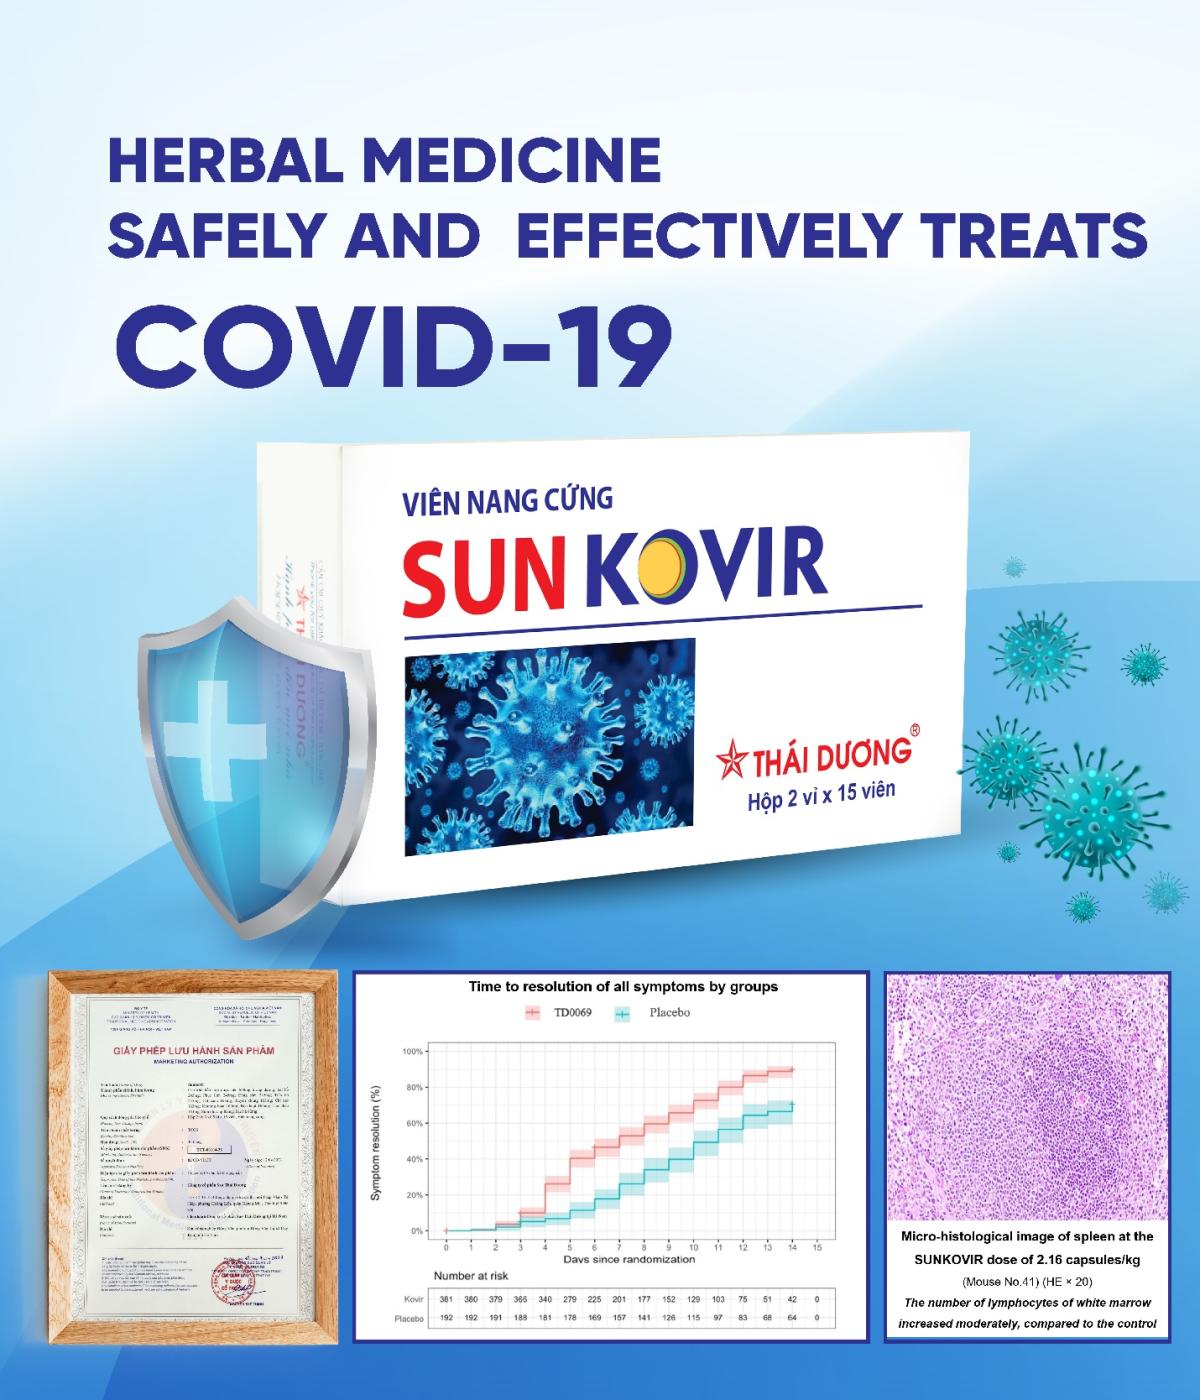 A New Herbal Medicine by Sao Thai Duong JSC SUNKOVIR Effectively Treats Covid-19, Flu, and Diseases Caused by Respiratory Virus